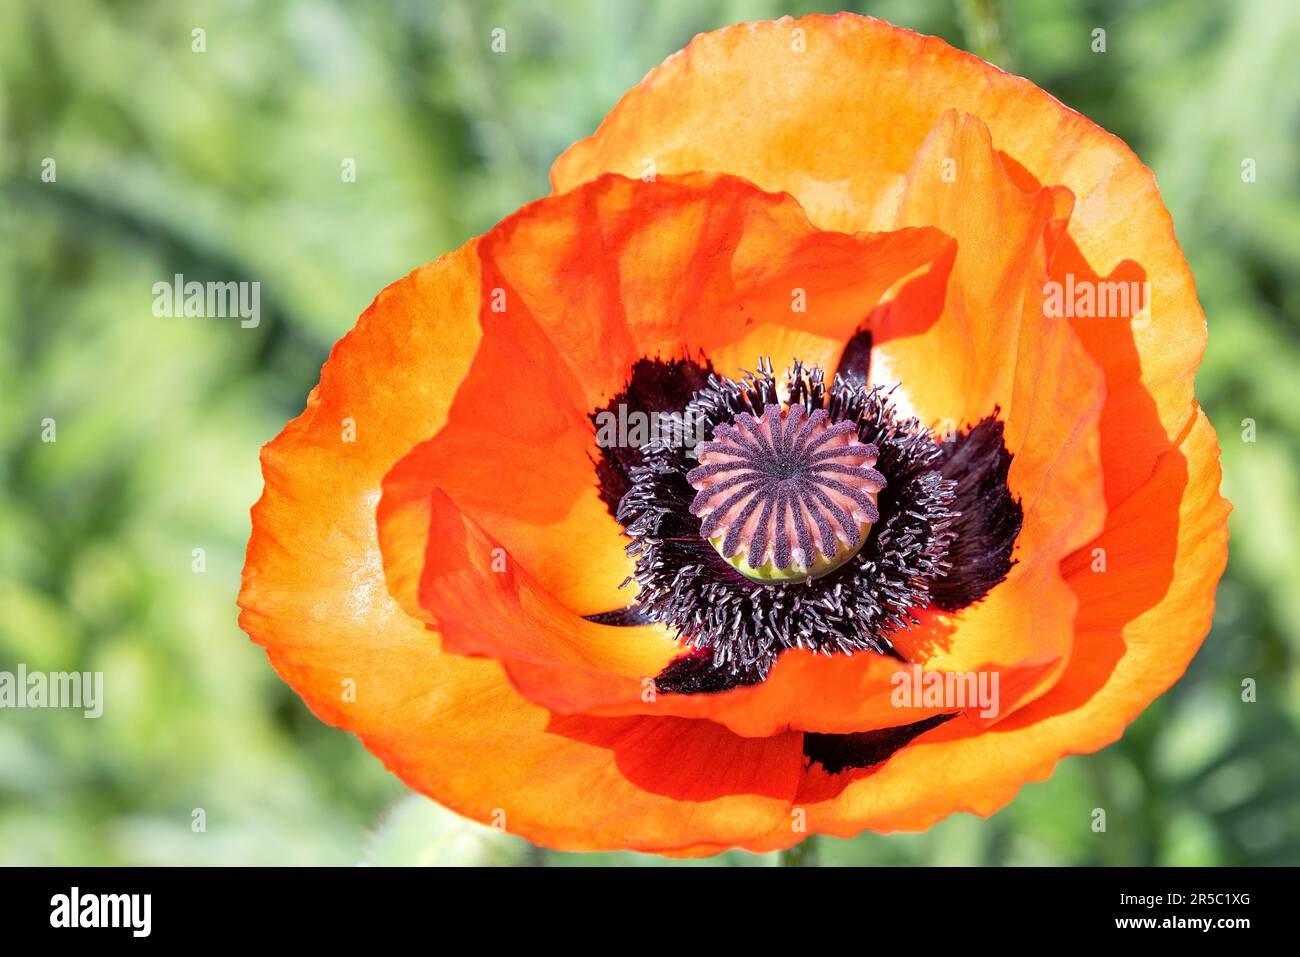 Beautiful bud of a scarlet poppy close-up in sunlight against a background of green foliage in blur. Stock Photo